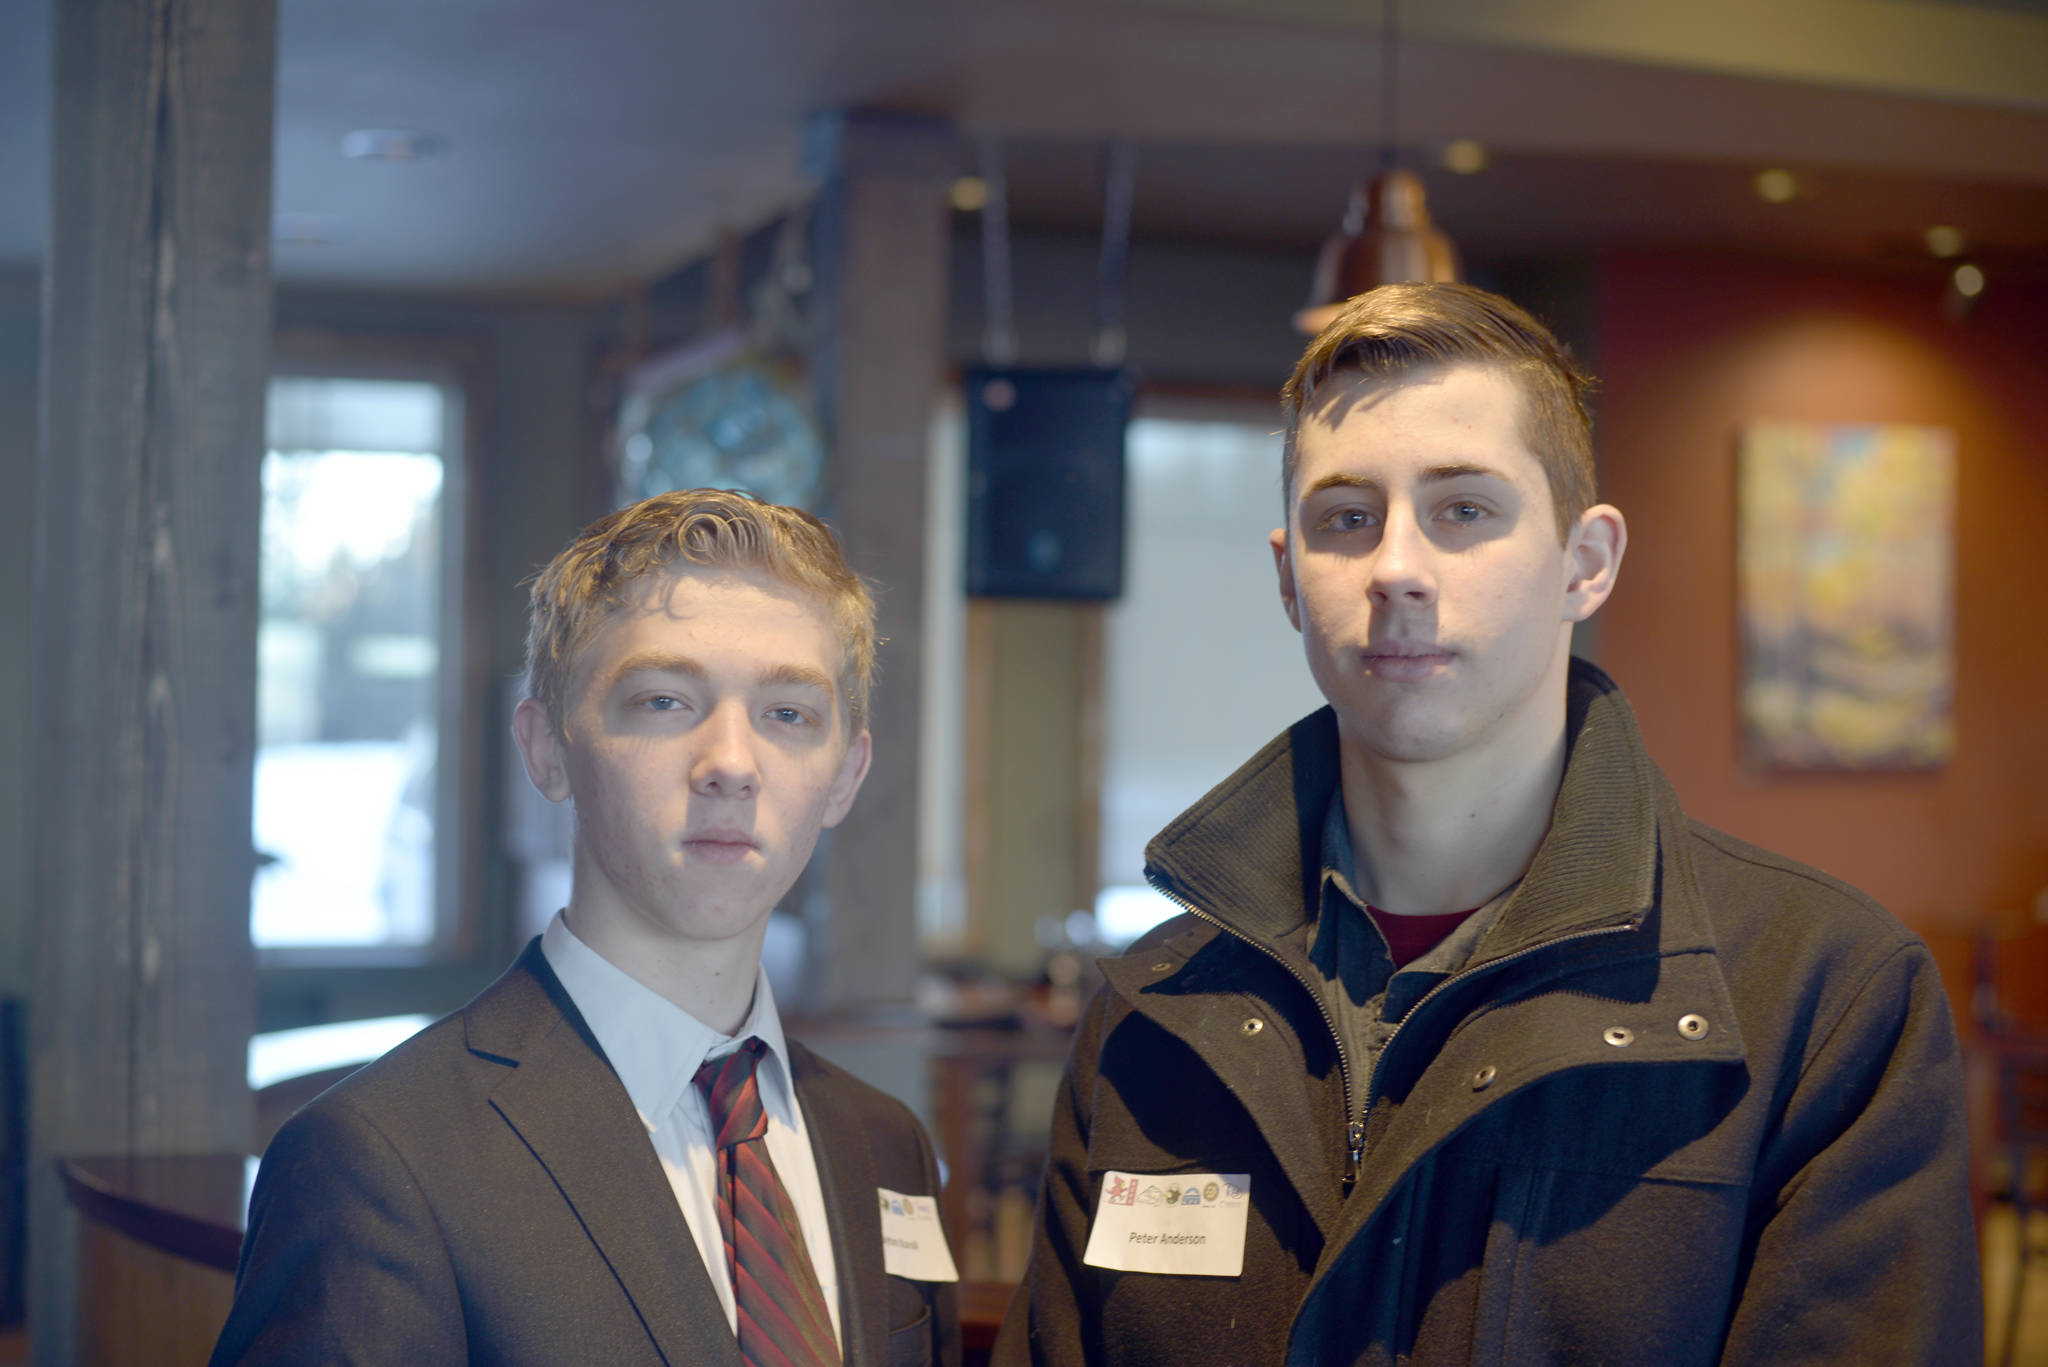 Clayton Koroll, left, and Peter Anderson, juniors at Kenai Central High School, shadow Luke Thibodeau, owner of The Flats Bistro in Kenai, on Wednesday as part of the job shadow program through the Kenai Chamber of Commerce and the Alaska Job Center in Kenai. Koroll and Anderson both want to open small restaraunts and be their own bosses, just like Thibodeau. (Photo by Delbrian Parfitt/For the Clarion)